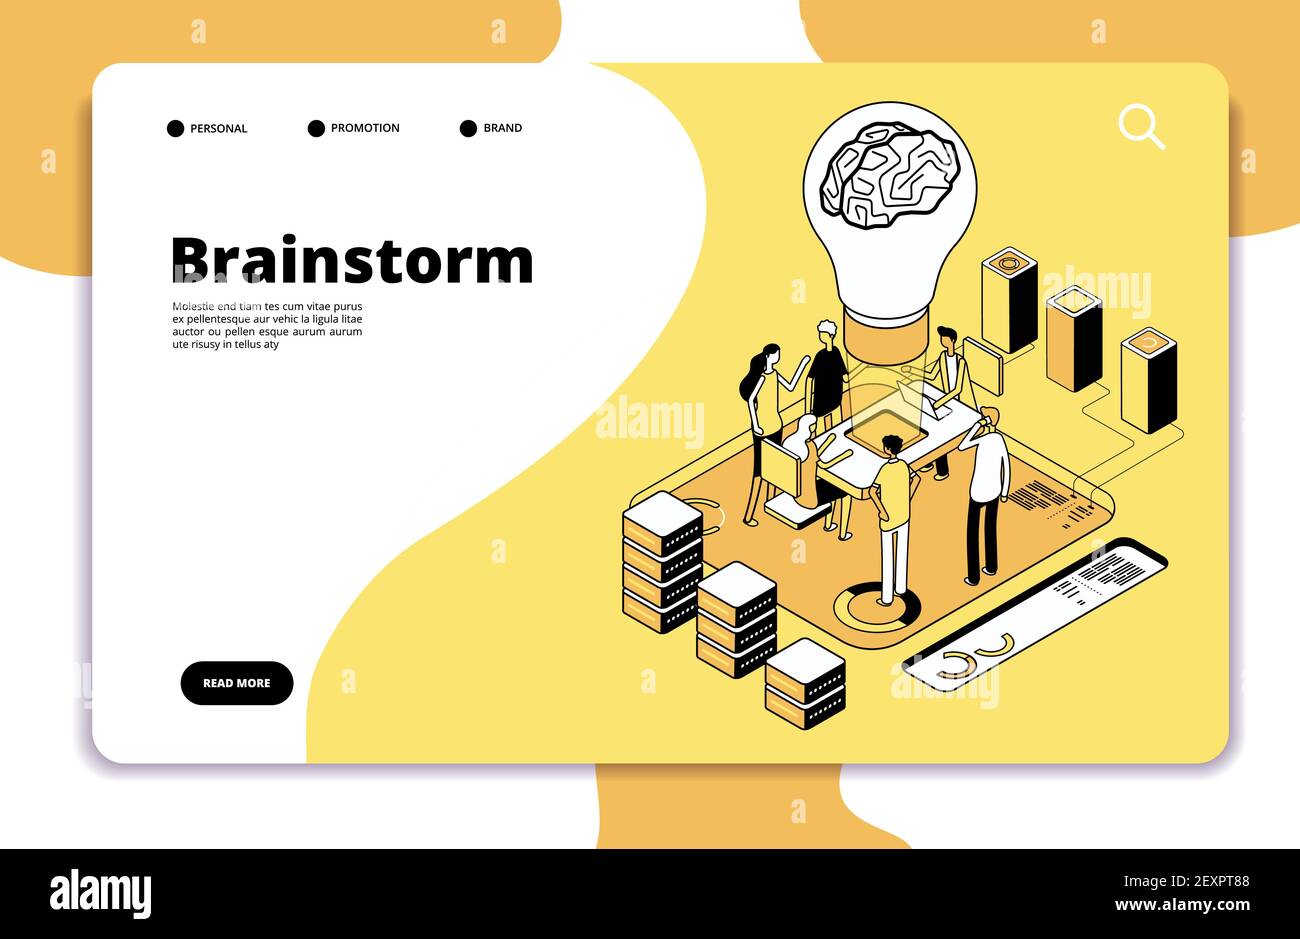 Brainstorm landing page. Business people launching new project and brainstorming. Innovation teamwork creative vector concept Stock Vector